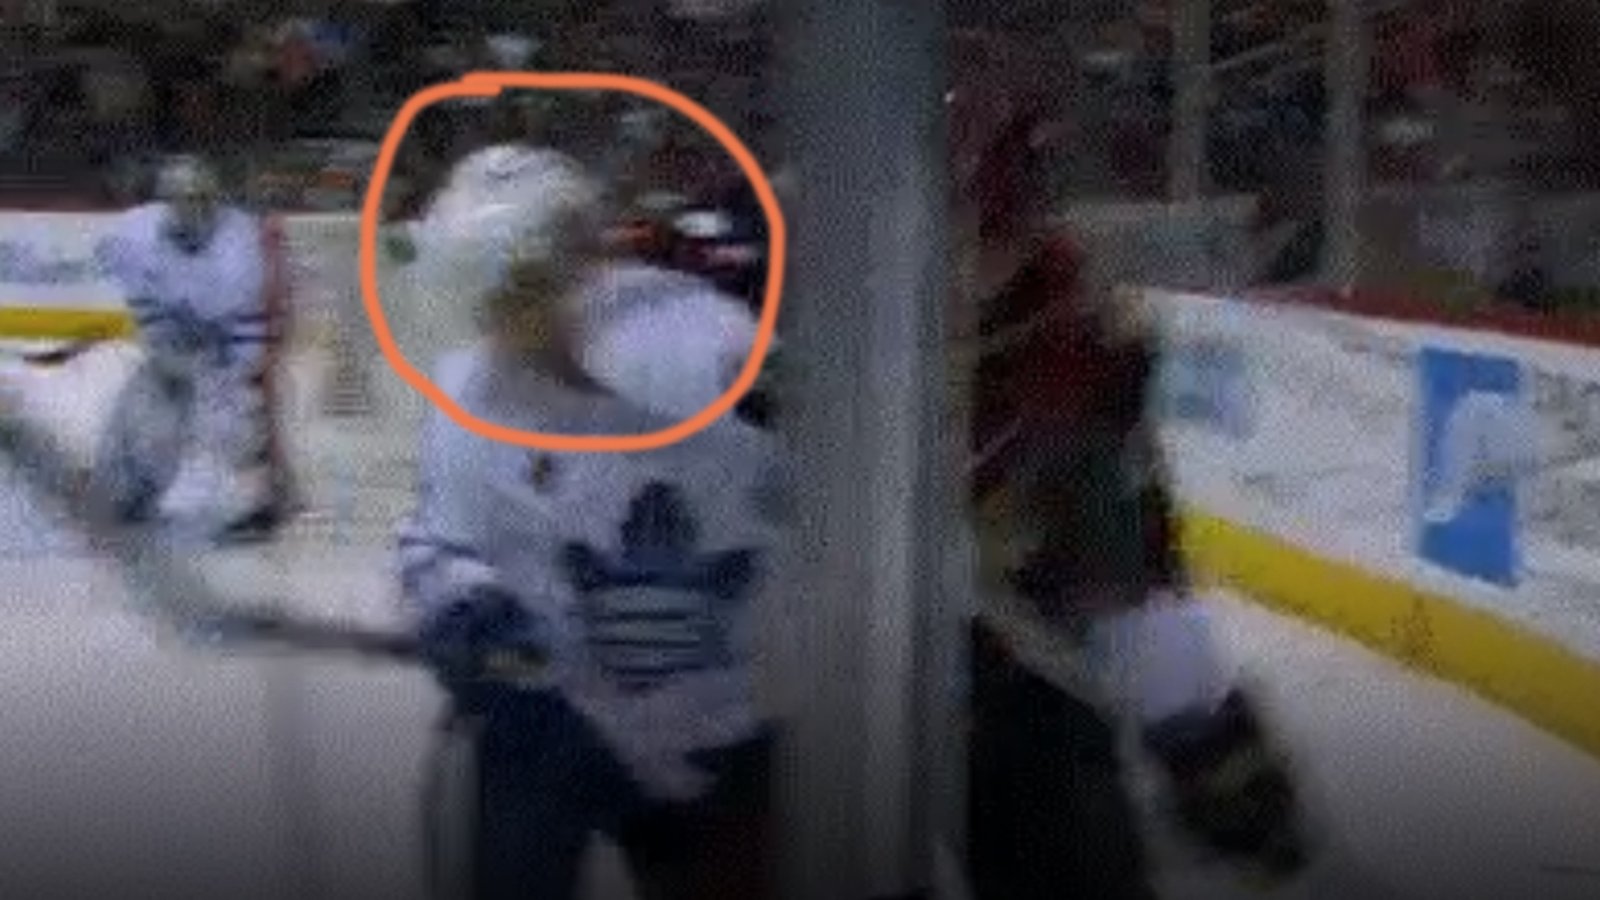 Kadri elbowed directly in the neck, forced to leave game in 1st period, may miss time